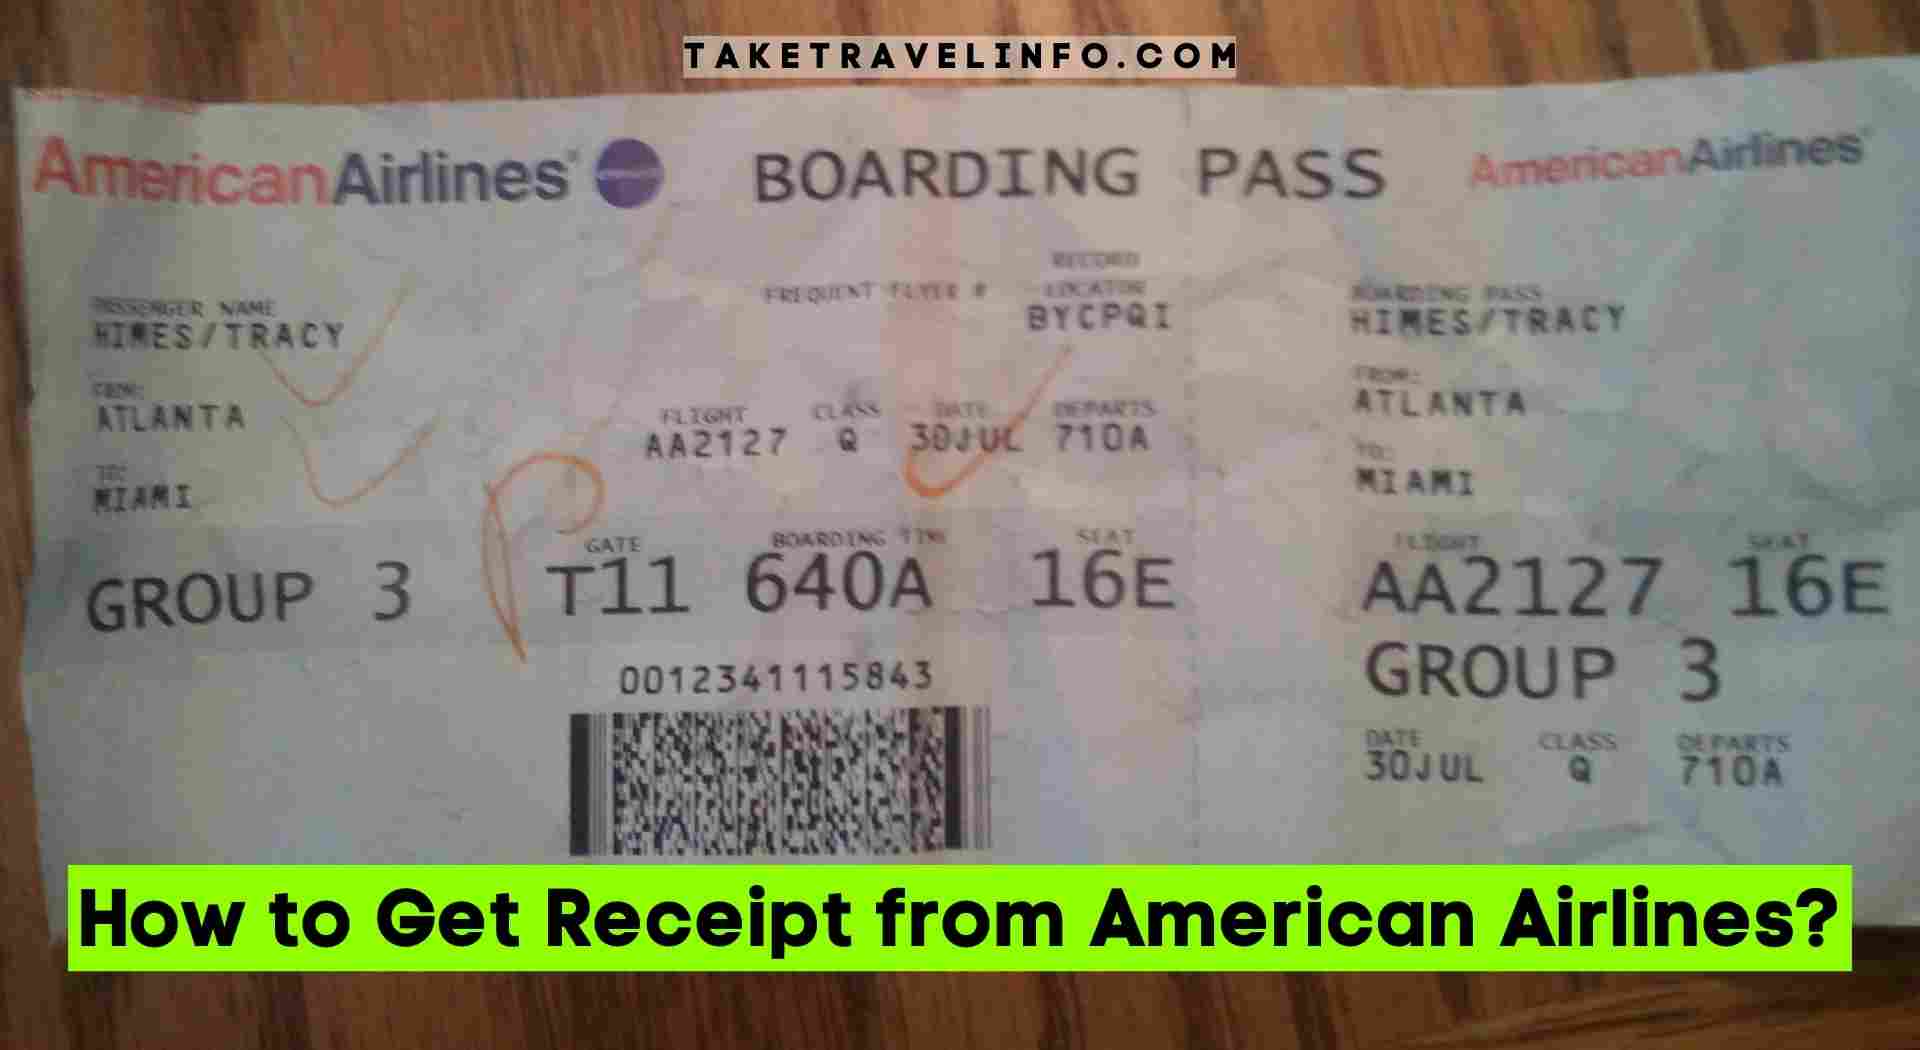 How to Get Receipt from American Airlines?